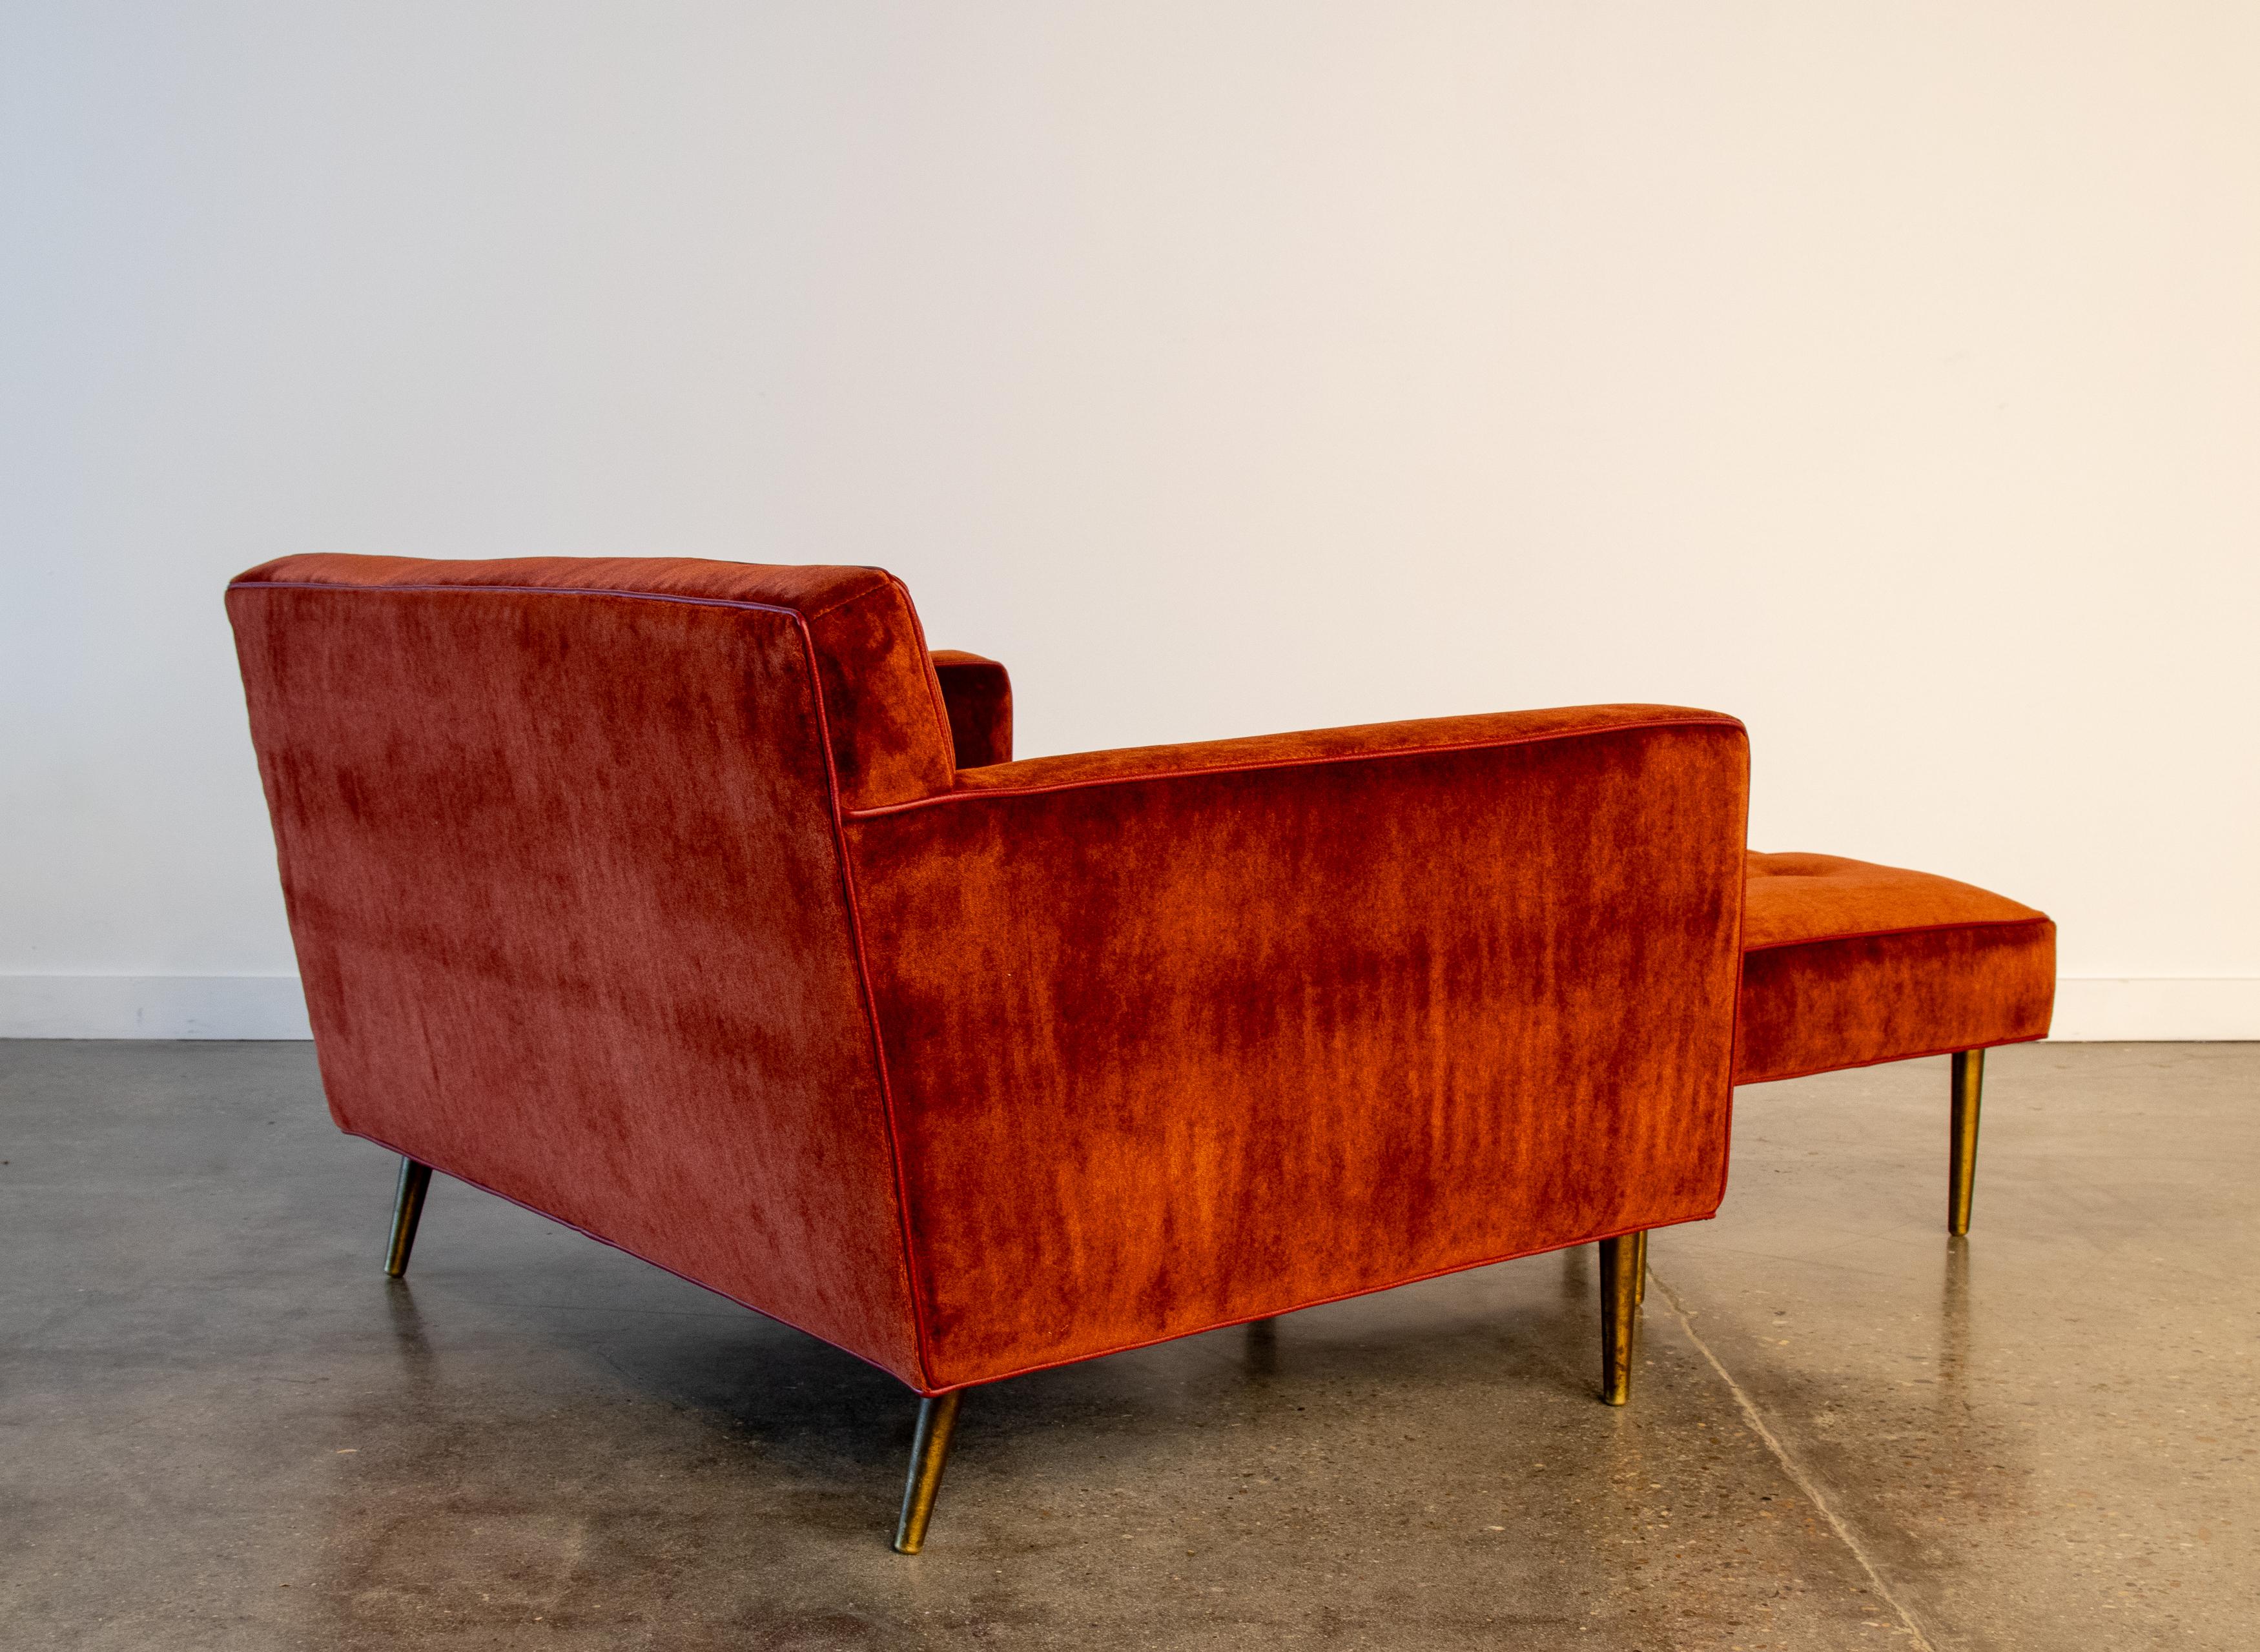 1950s Edward Wormley for Dunbar Oversized Chair & Ottoman Brass legs Red Mohair In Good Condition For Sale In Virginia Beach, VA